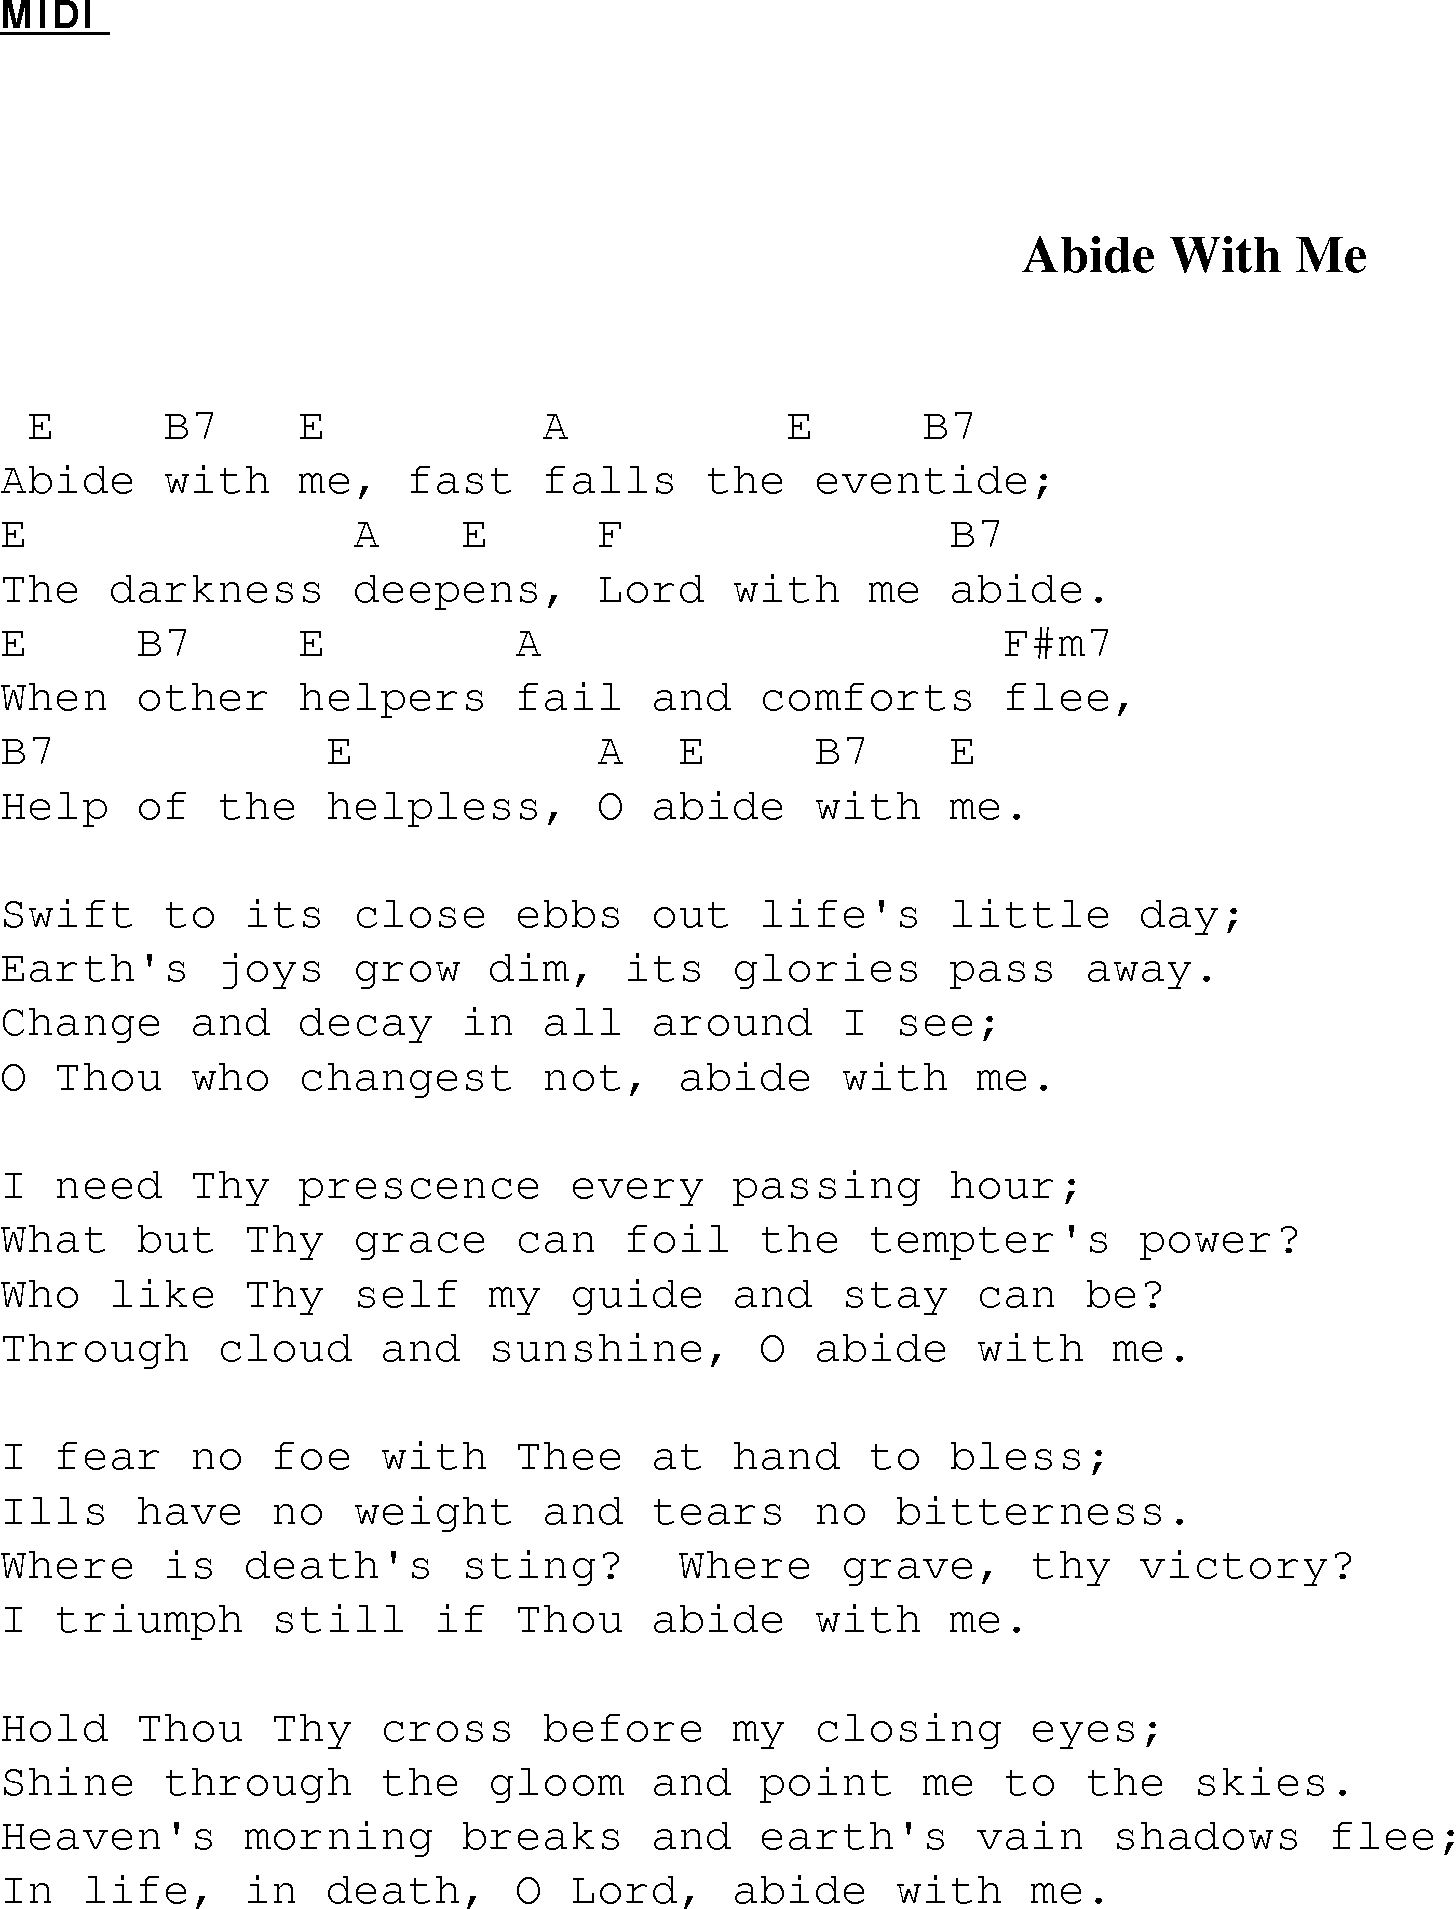 Gospel Song: abide_with_me, lyrics and chords.